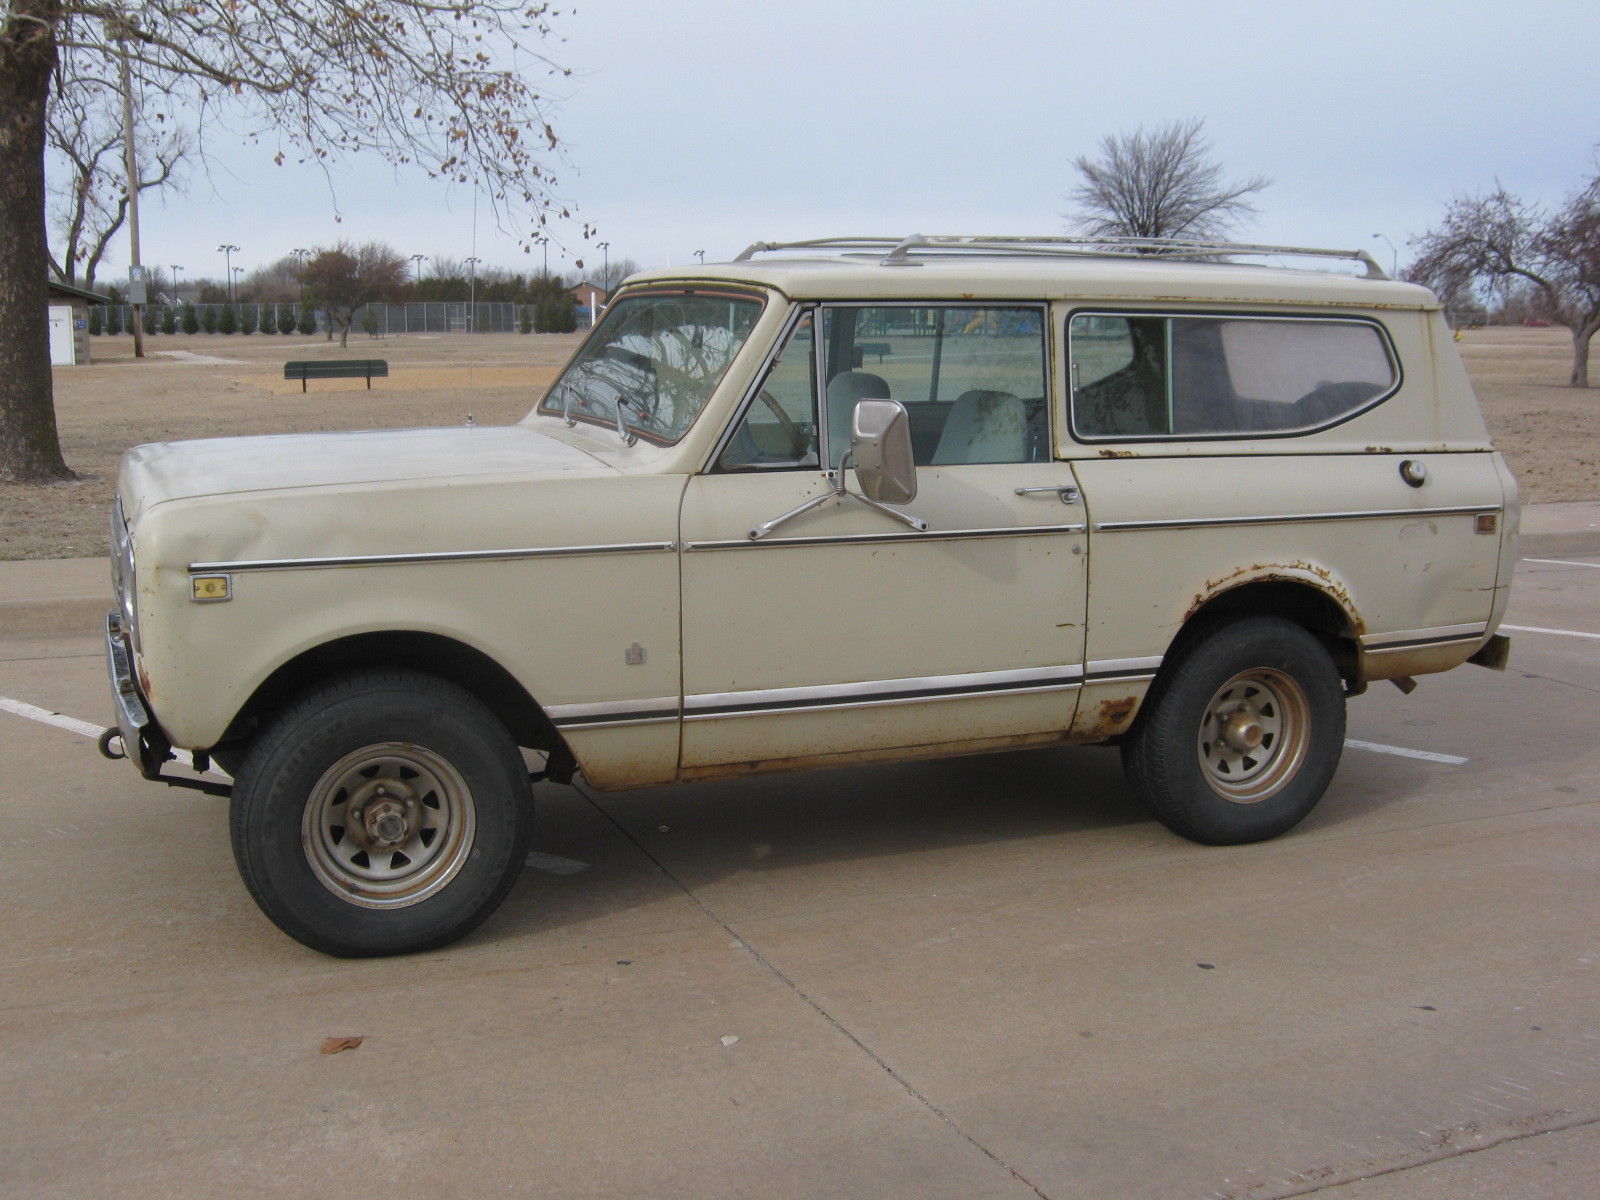 1977 International Scout II - 4X4 - Daily Driver - * NO RESERVE